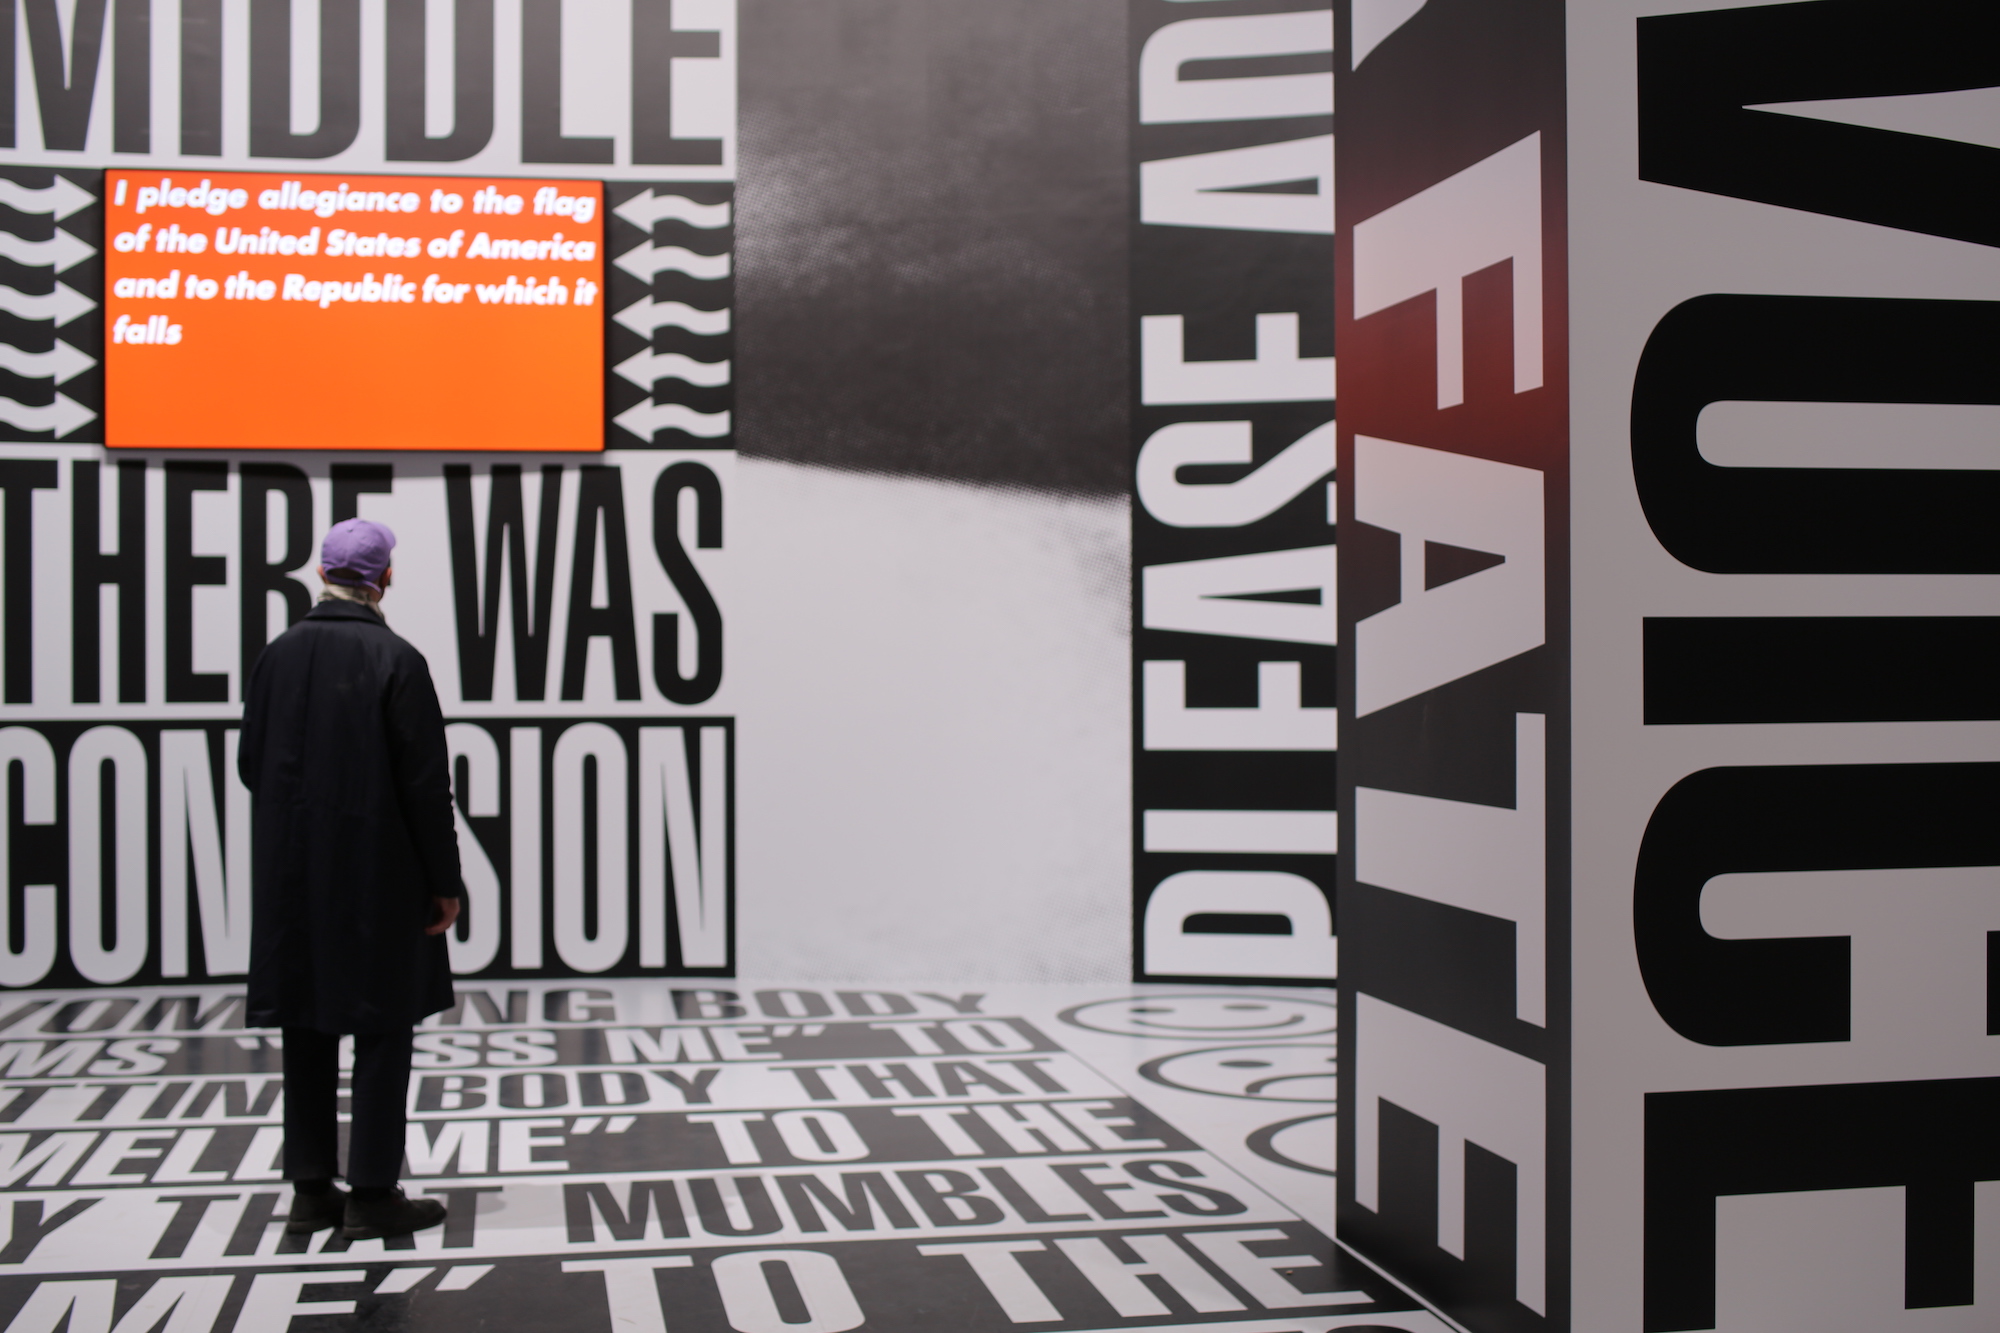 Barbara Kruger, Untitled (Beginning/Middle/End) (2022) at the Giardini Central Pavilion. Photo by Louise Benson